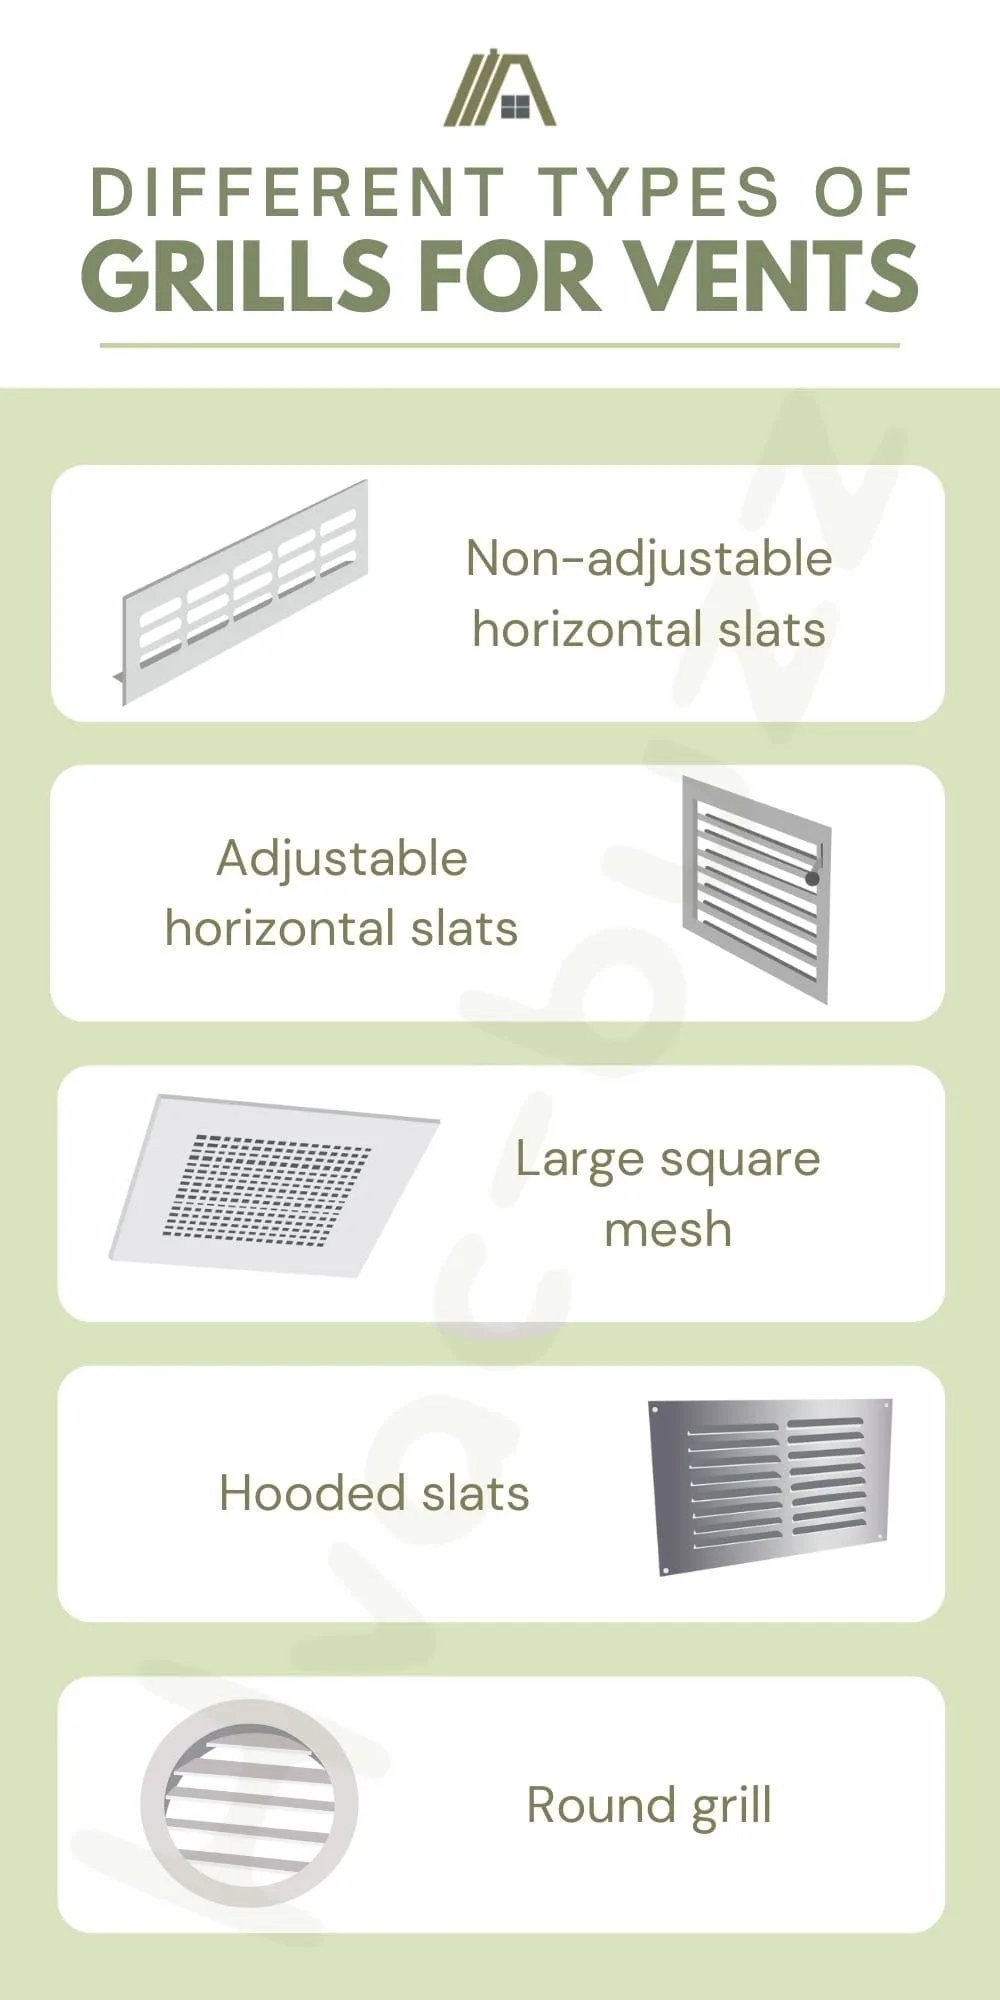 Illustrations of different types of grills for vents: non-adjustable horizontal slats, adjustable horizontal slats, large square mesh, hooded slats and round grill